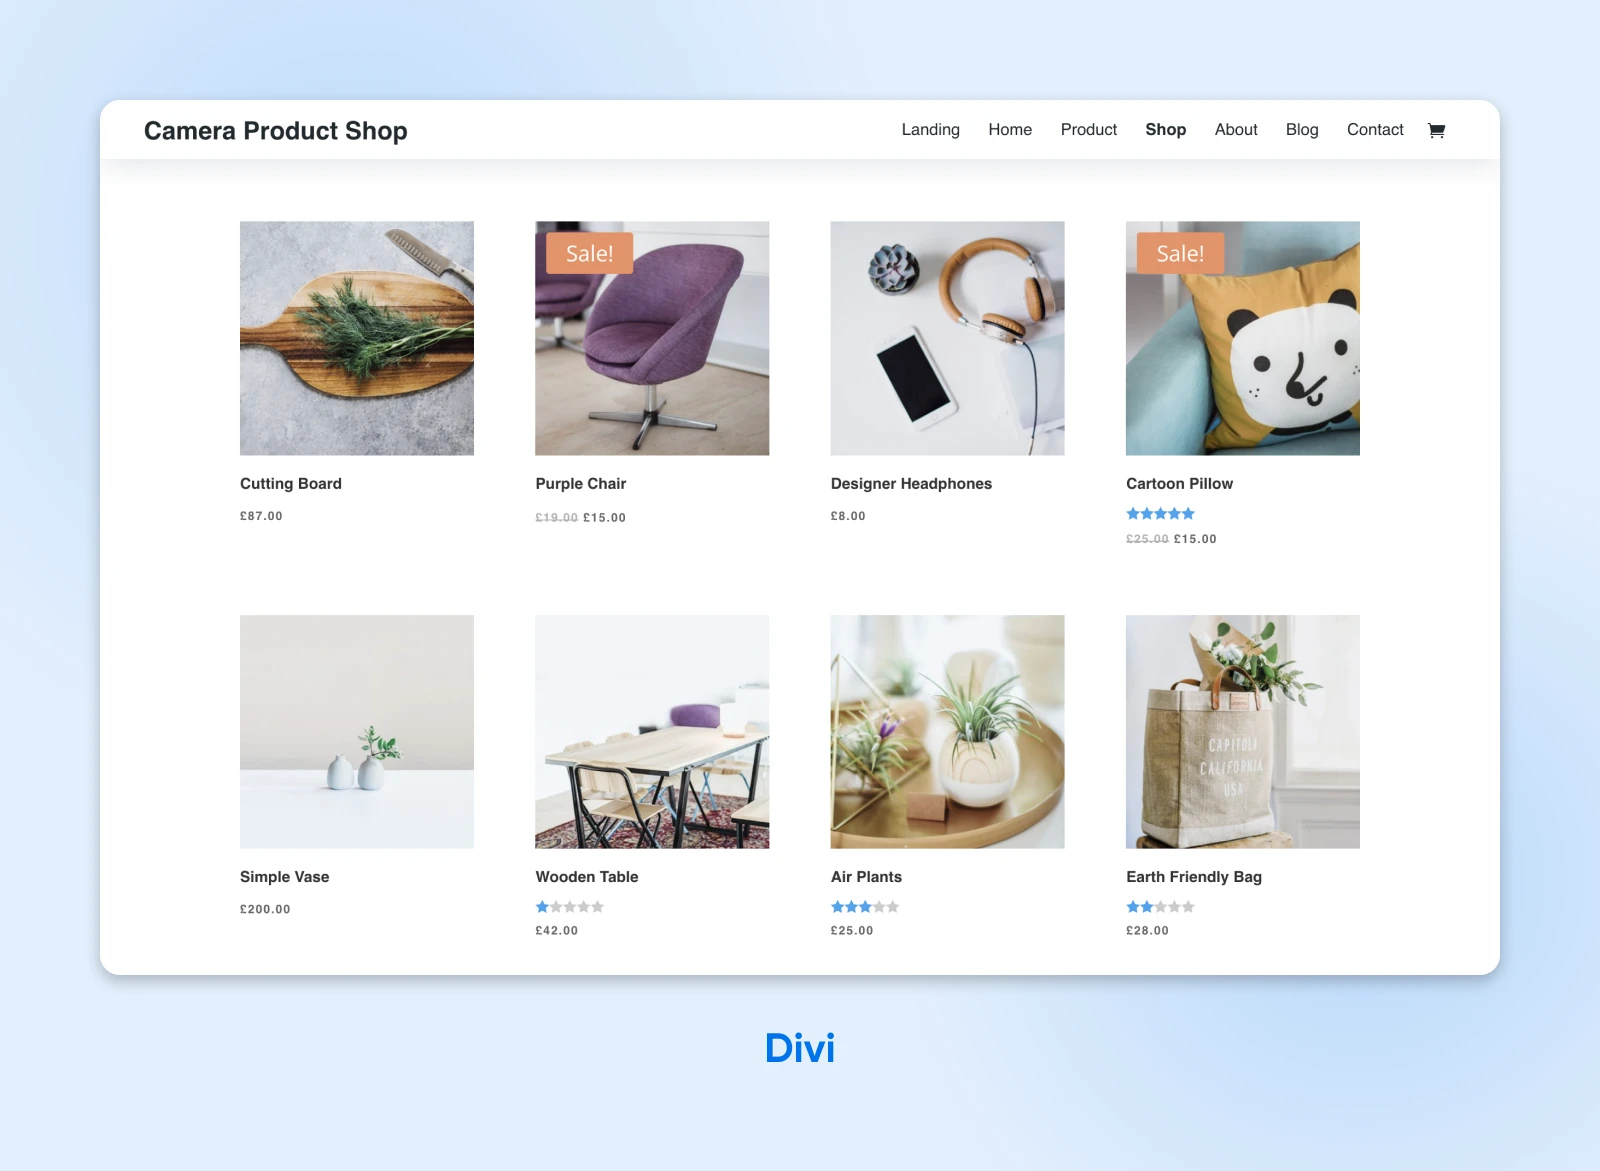 Divi WooCommerce theme showing "Camera Product Shop" with items and their prices like cutting board, simple vase, etc.